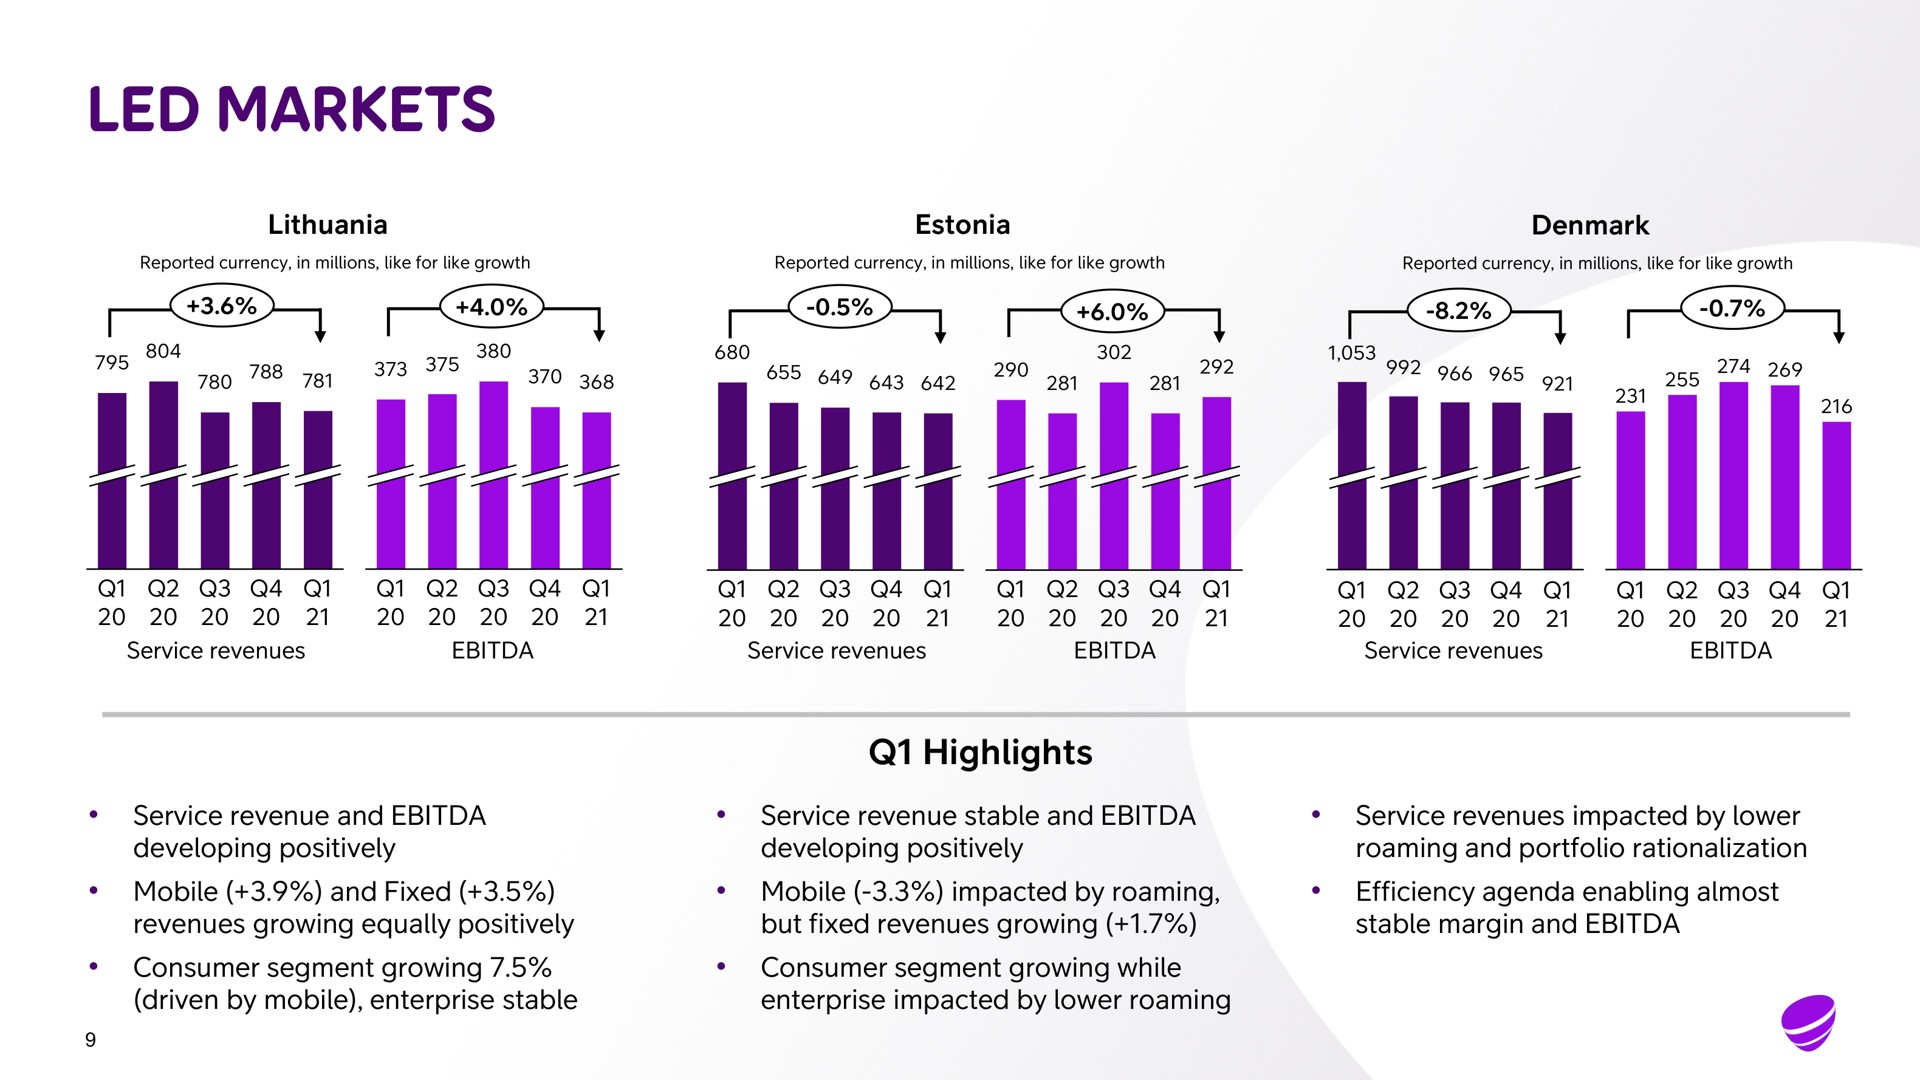 led markets service revenue and developing positively mobile and fixed revenues growing equally positively consumer segment growing driven by mobile enterprise stable highlights service revenue stable and developing positively mobile impacted by roaming but fixed revenues growing consumer segment growing while enterprise impacted by lower roaming service revenues impacted by lower roaming and portfolio rationalization efficiency agenda enabling almost stable margin and at | Telia Company